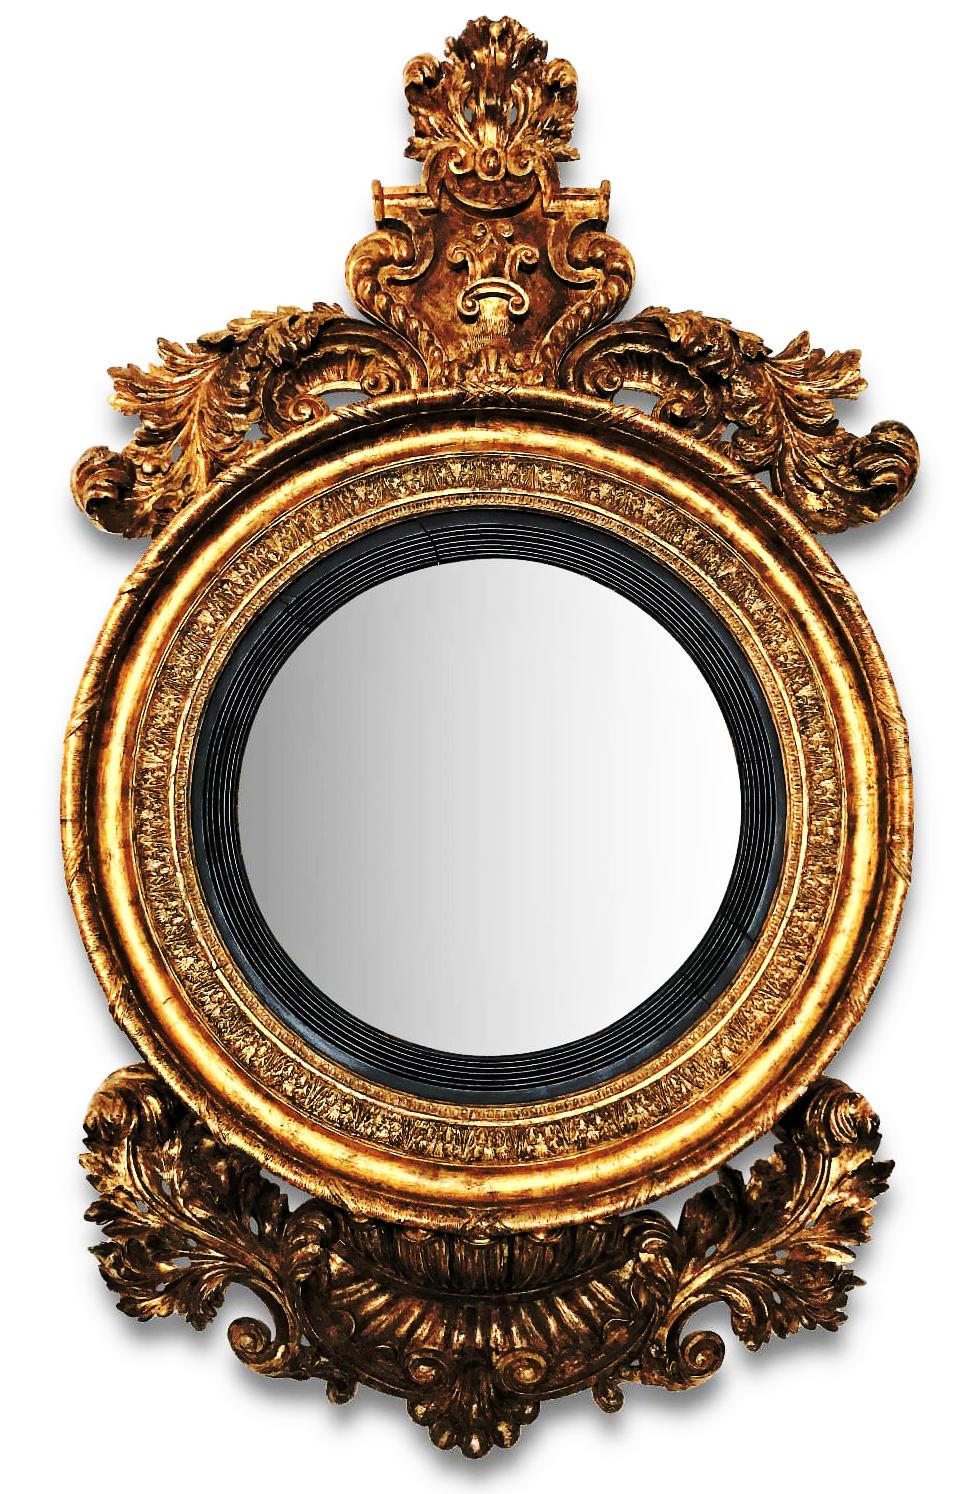 A monumental Irish George IV giltwood convex mirror.
A very large and impressive George IV giltwood convex mirror, the original circular convex mirror plate, with a black reeded ebonised border, inside a giltwood acanthus border. The top carved